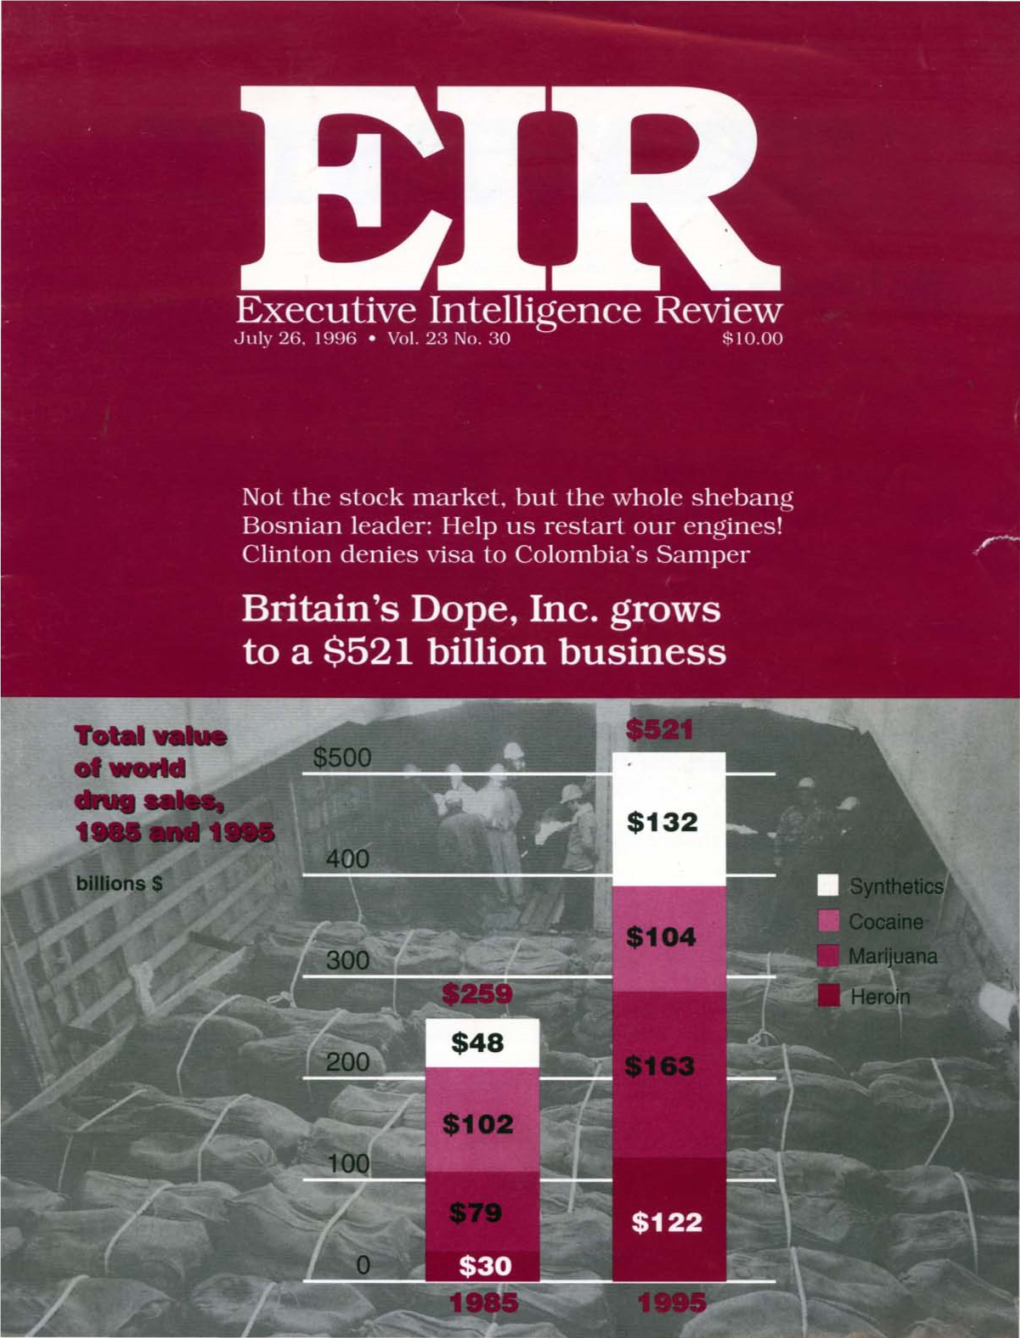 Executive Intelligence Review, Volume 23, Number 30, July 26, 1996